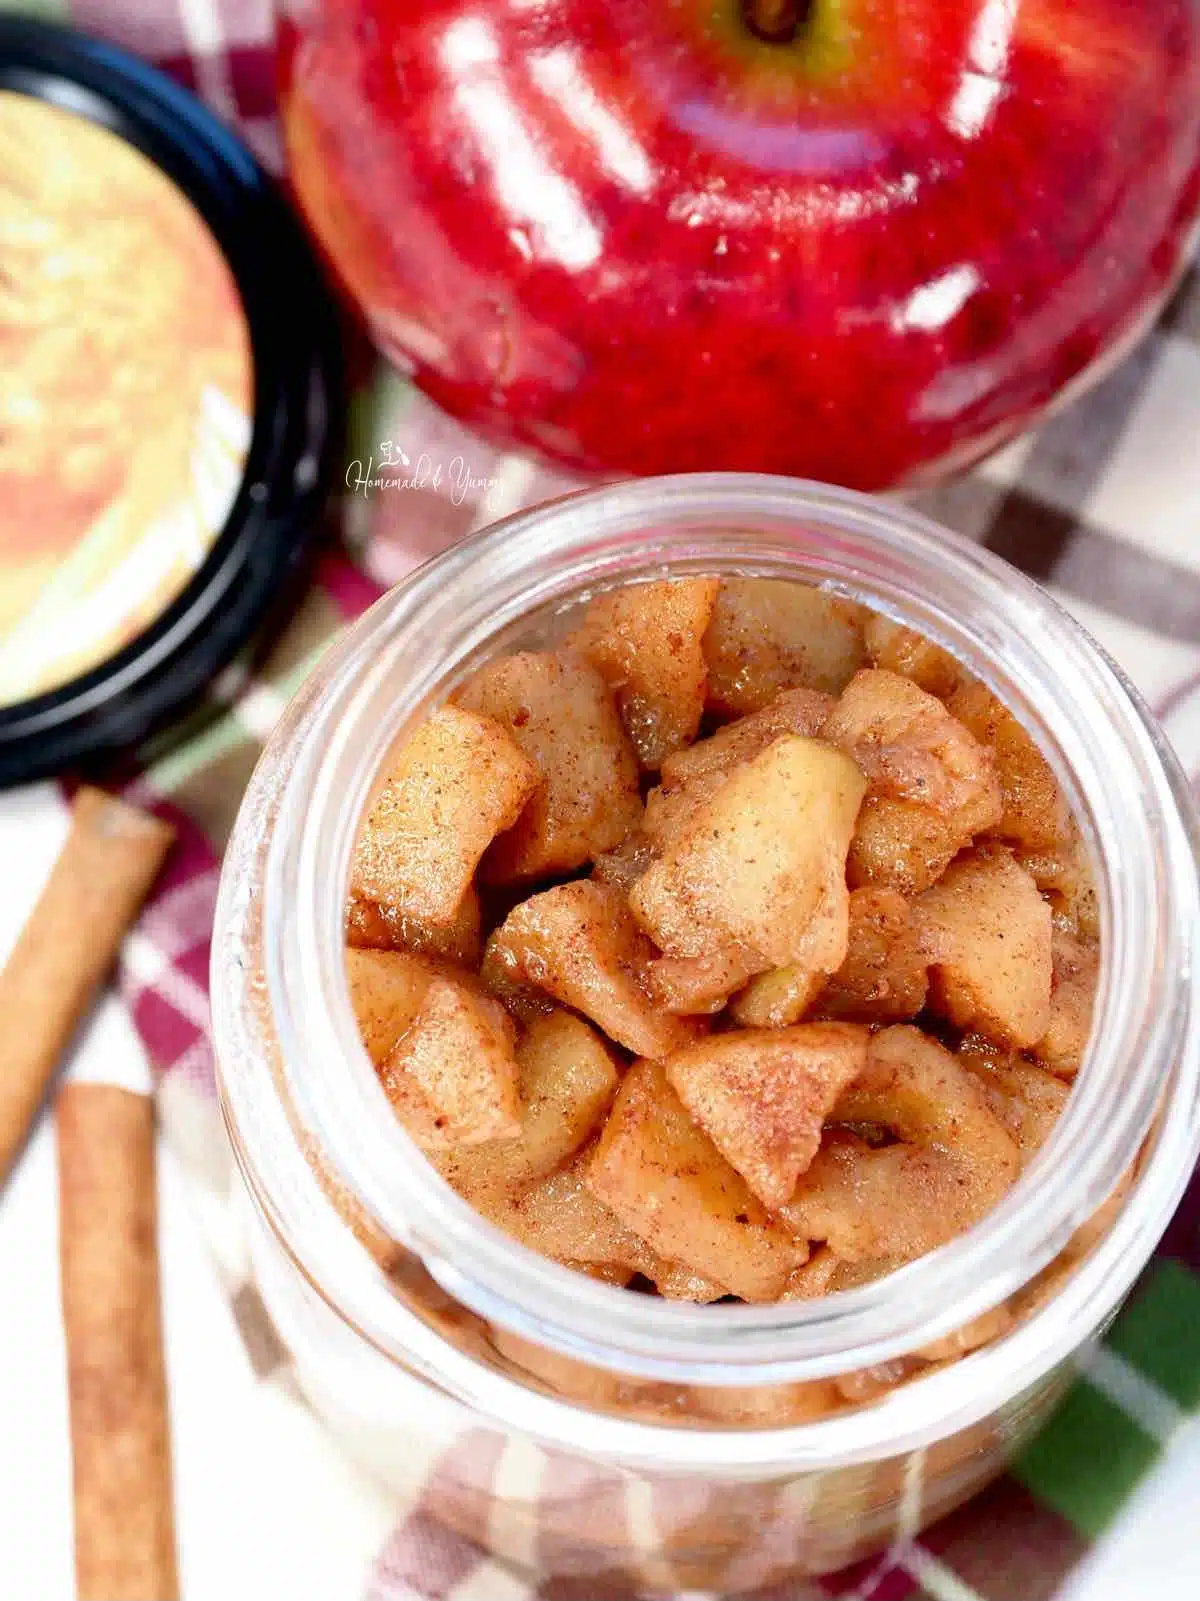 Spiced apple topping in a jar ready to eat.